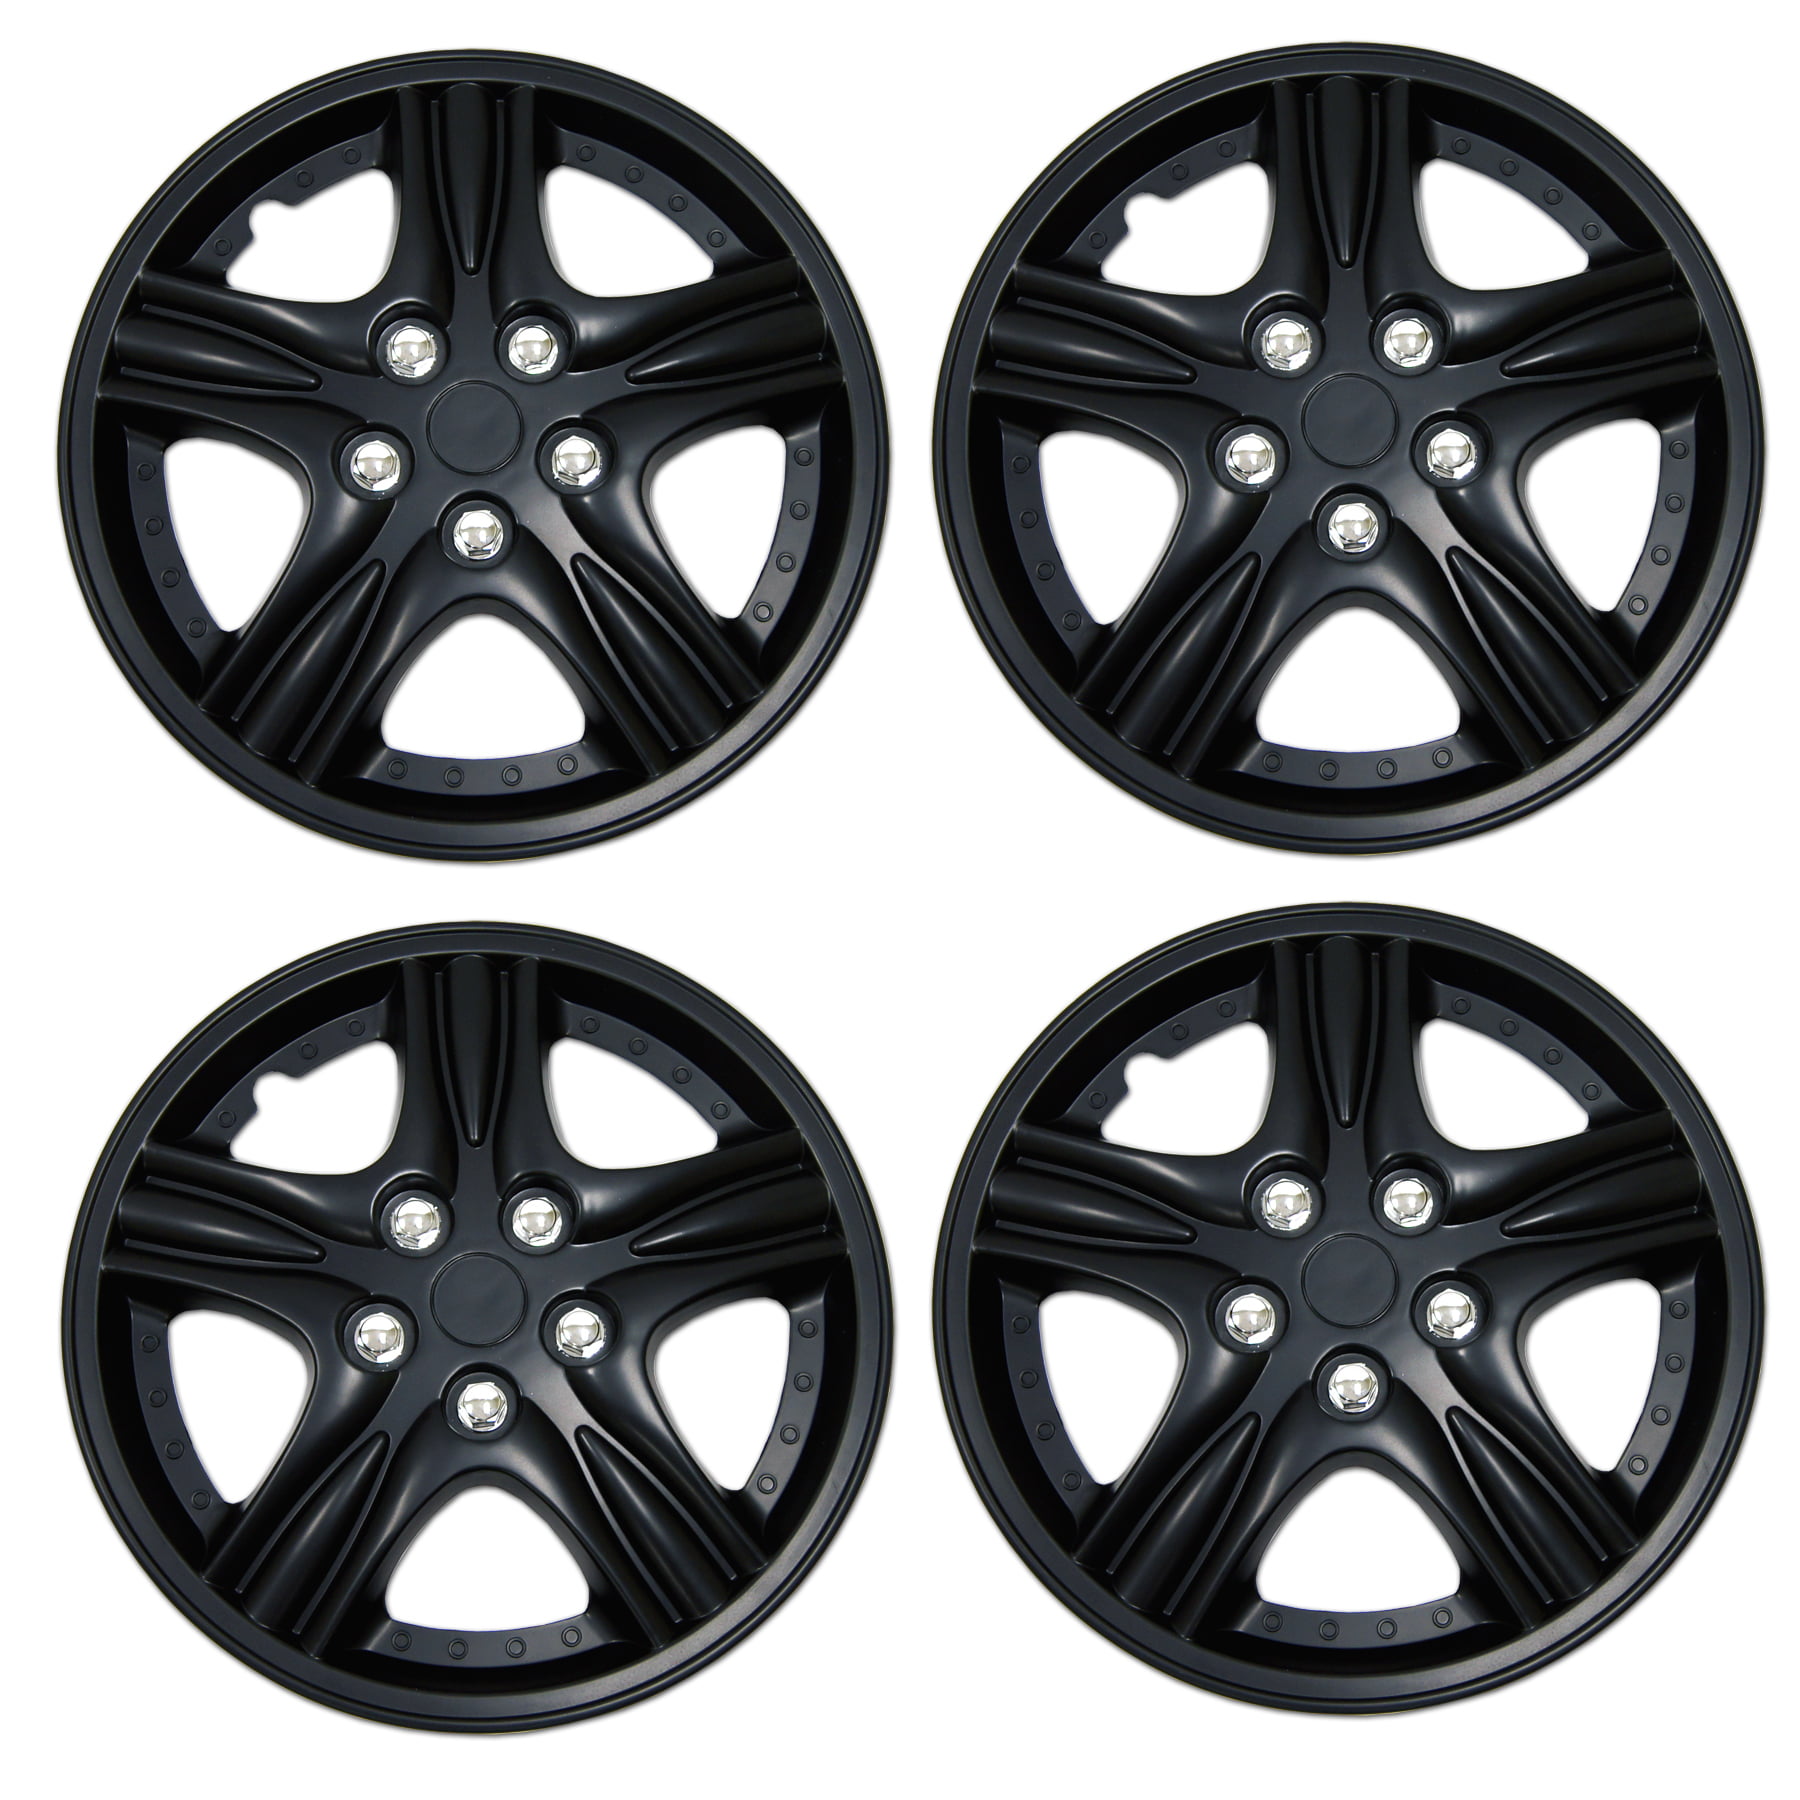 Pop-On TuningPros WSC3-515B15 4pcs Set Snap-On Type 15-Inches Matte Black Hubcaps Wheel Cover 